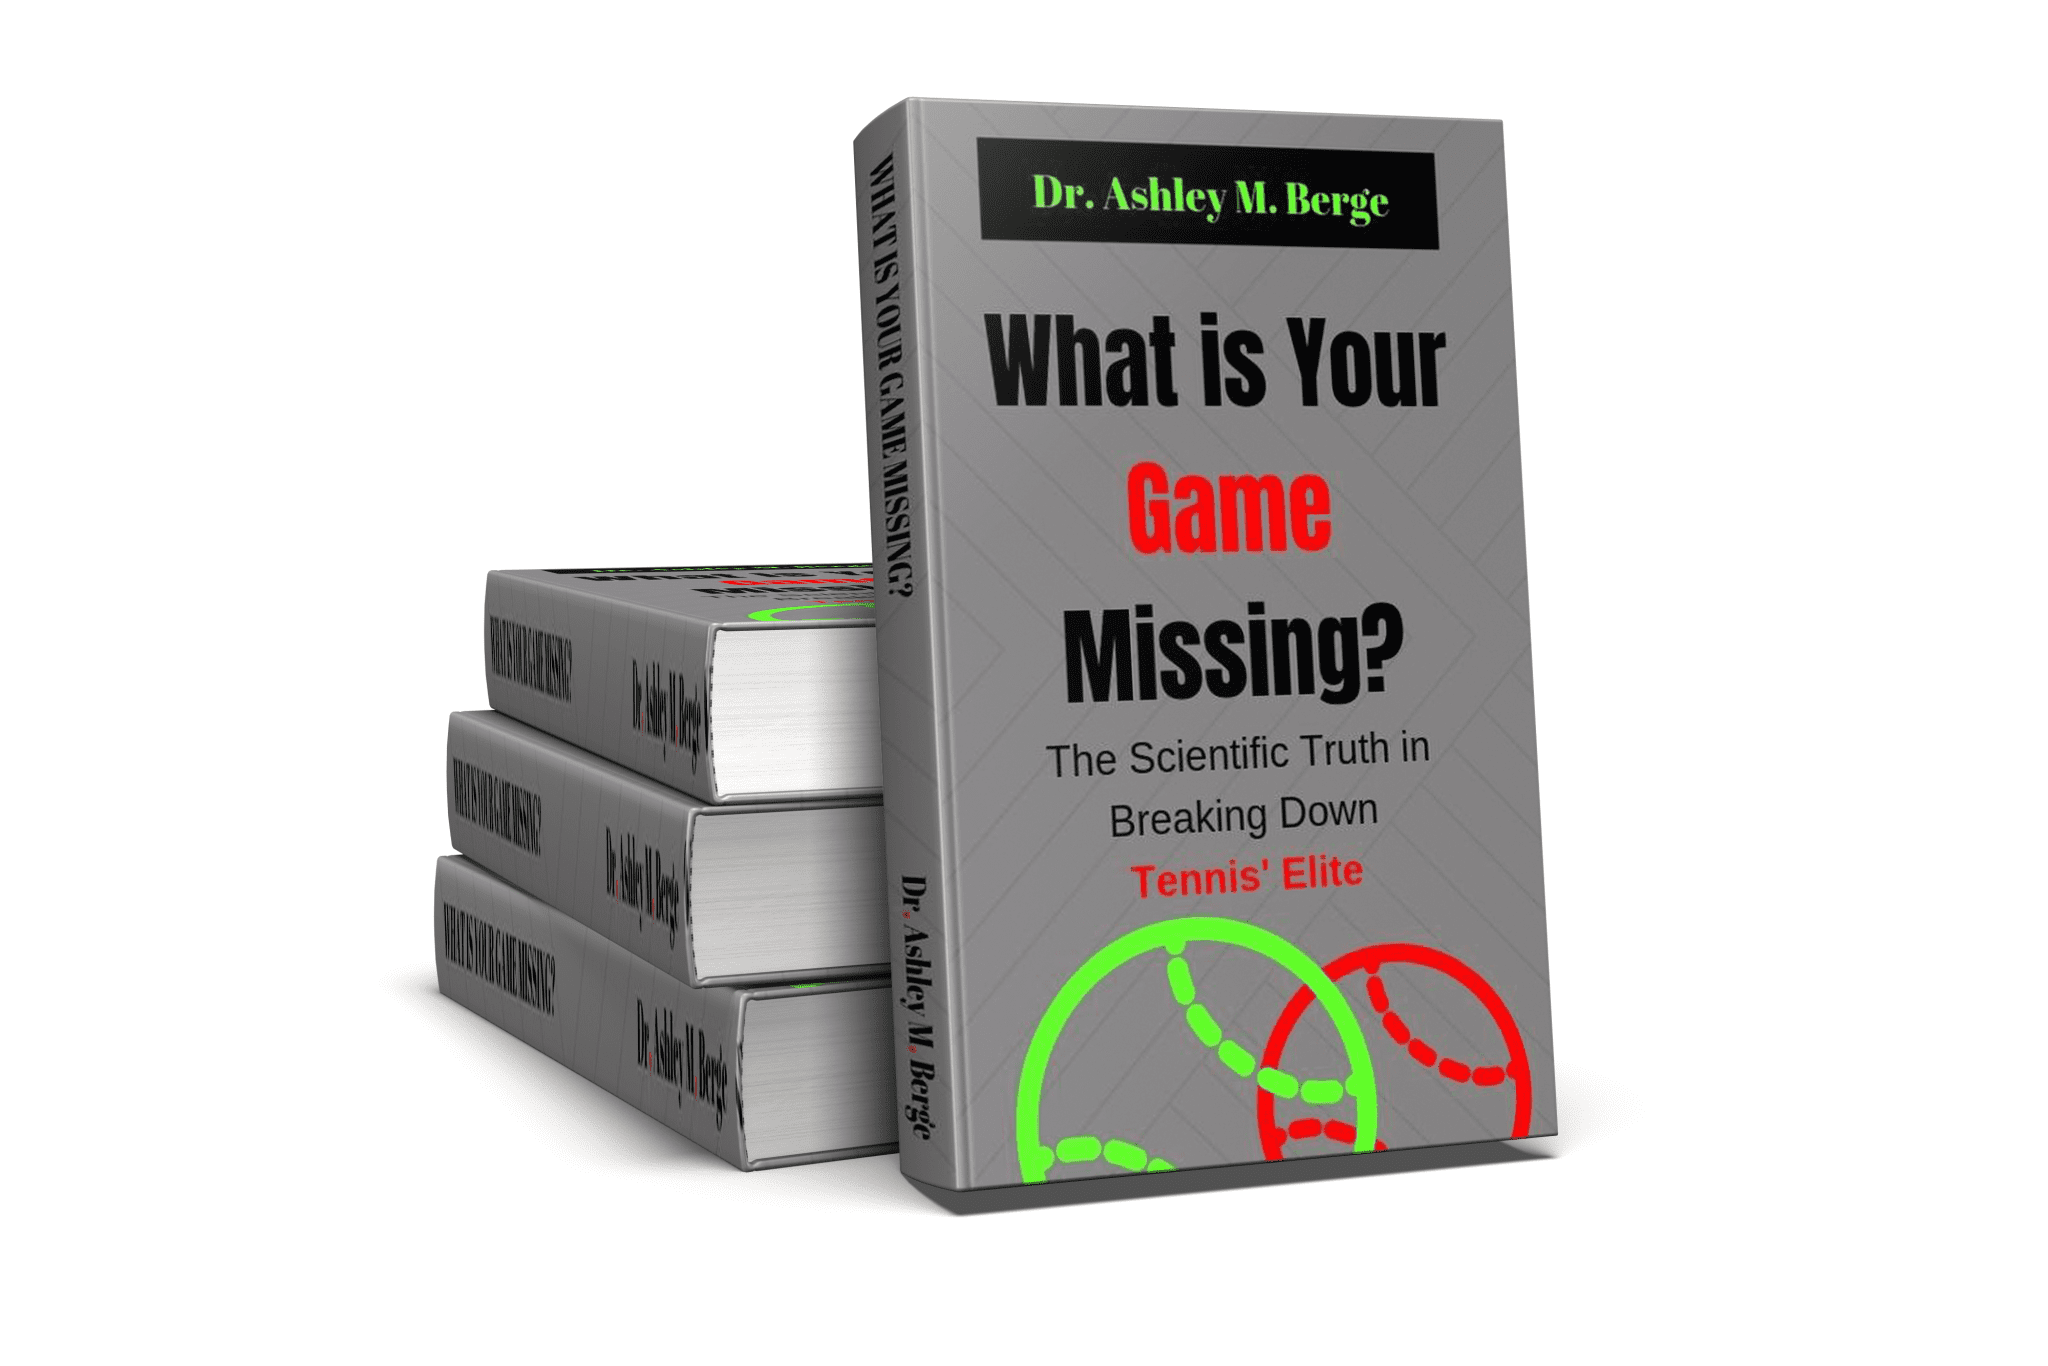 What is Your Game <a href="https://am8international.com/product/rrp-what-is-your-game-missing-download-only/" data-type="product" data-id="17586" rel="nofollow">Missing?</a>